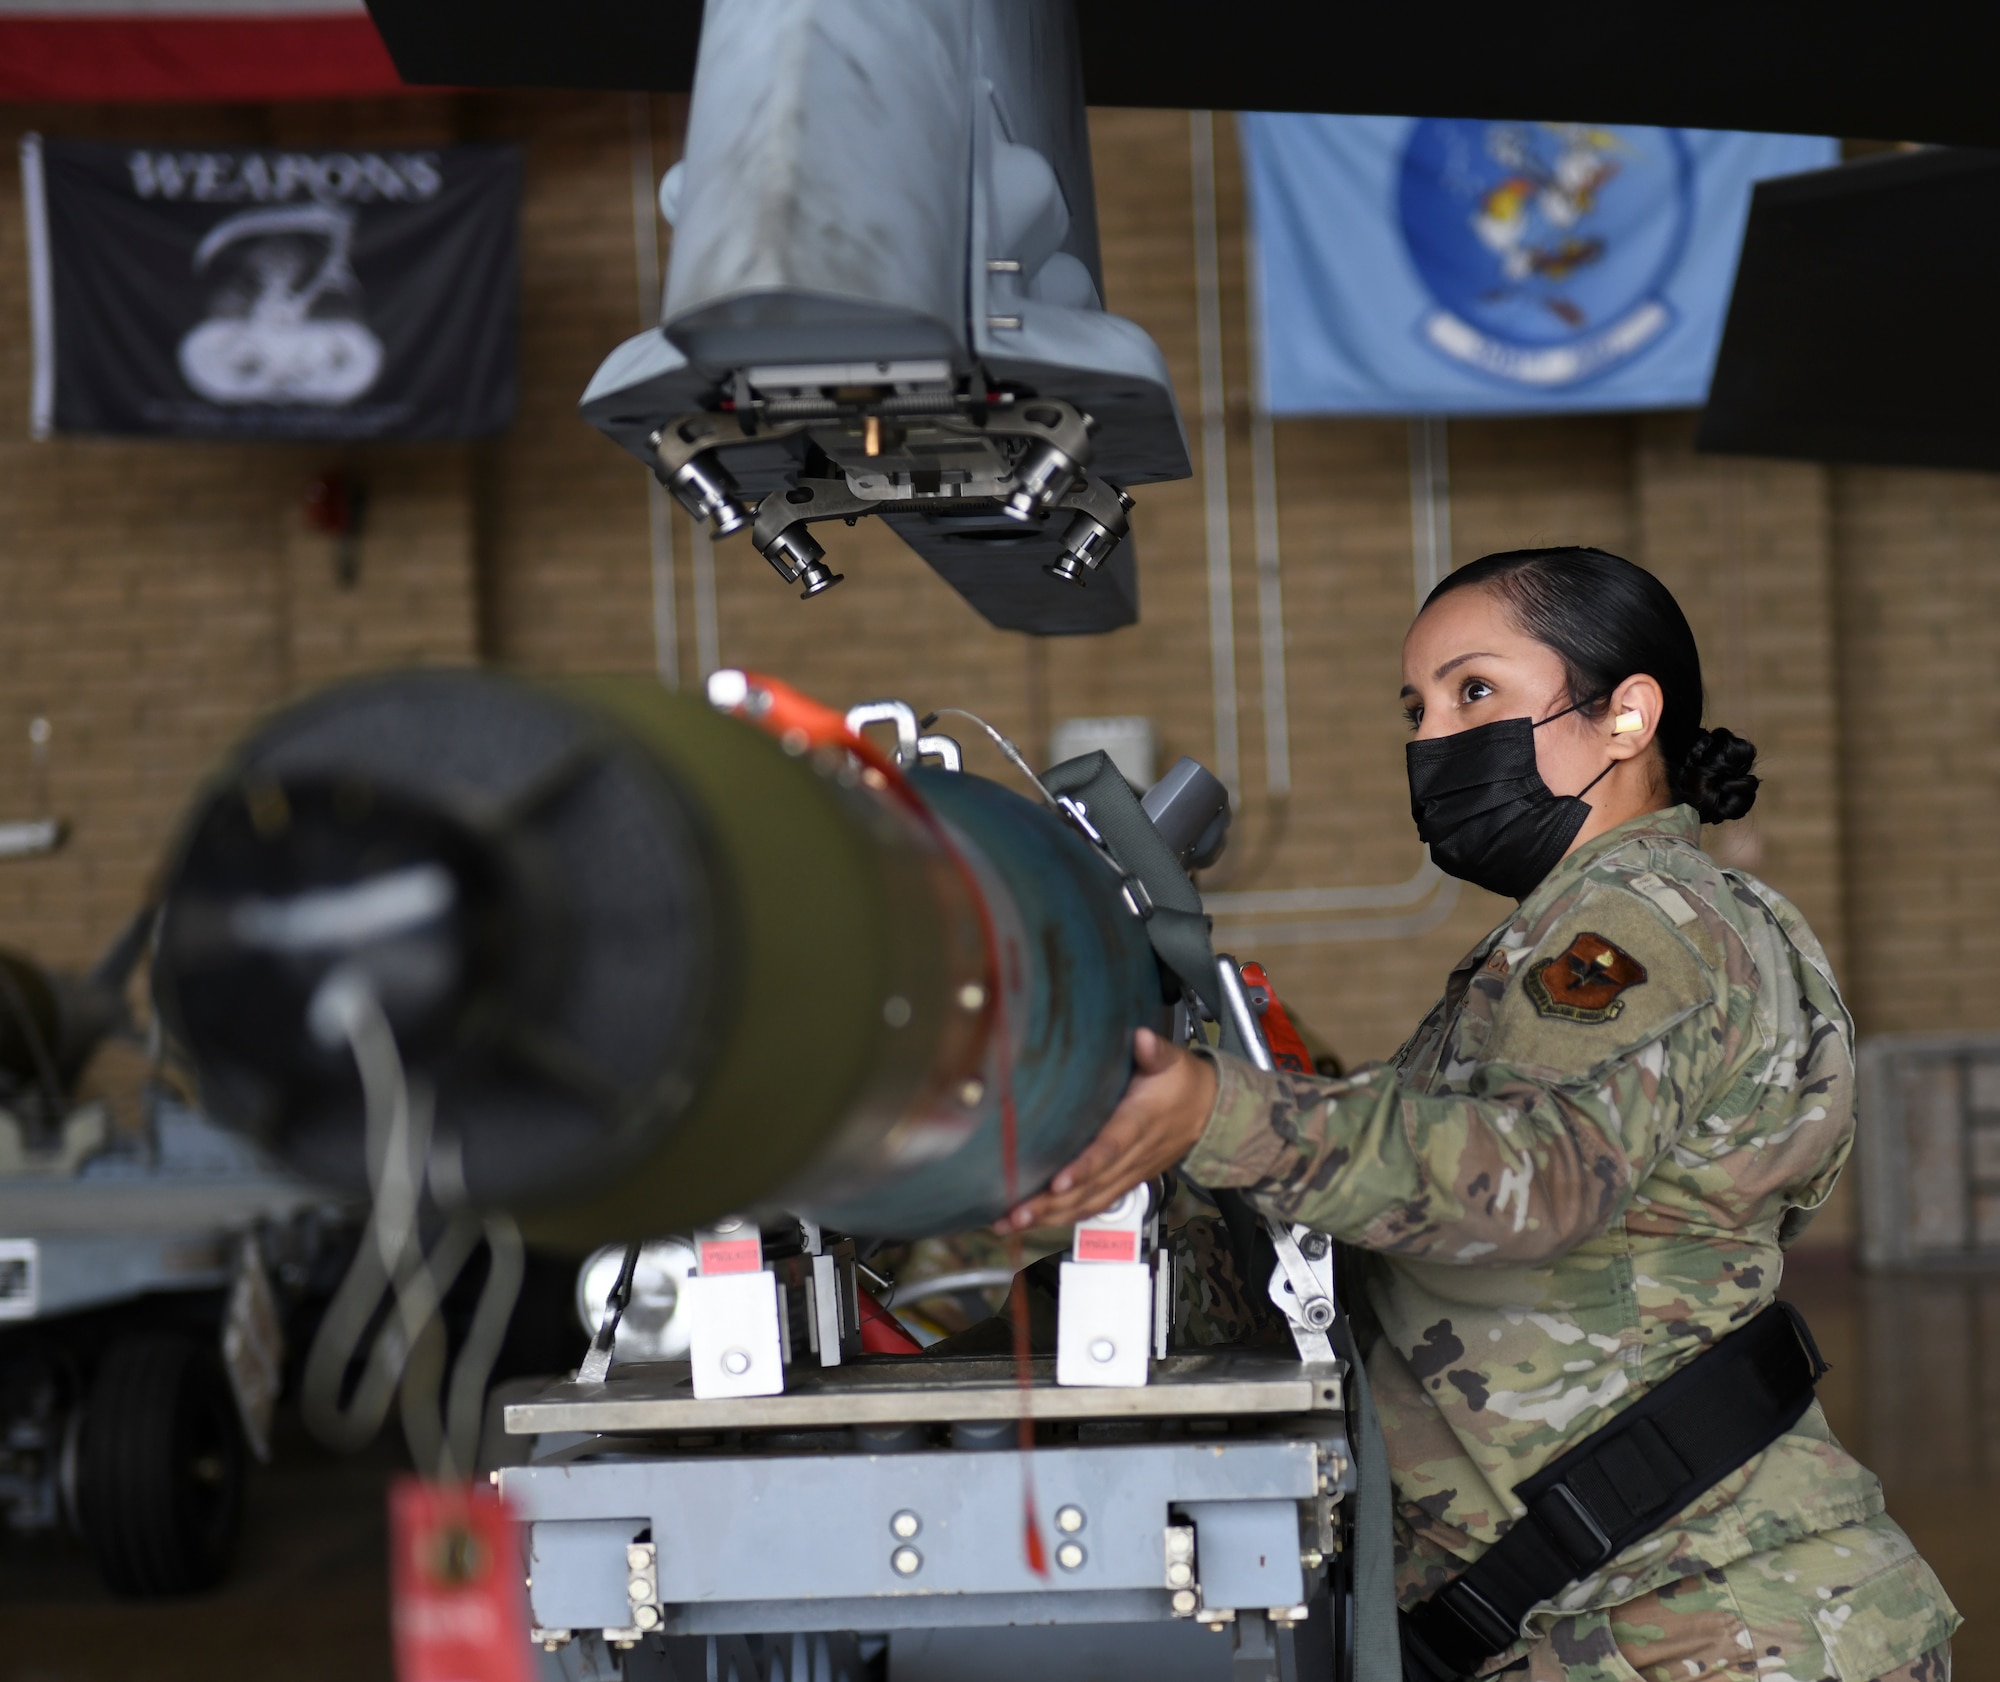 Staff Sgt. Cindy Guillen, 56th Component Maintenance Squadron weapons load technician, loads a GBU-12 Paveway II laser-guided bomb on an F-35A Lightning II during an exhibition load March 25, 2021, at Luke Air Force Base, Arizona. Guillen spoke about participating in the load to bring attention to the fact that only three women from her career field have made it to the rank of chief master sergeant since the inception of the Air Force. Diversity allows the Air Force to capitalize on all available talent by enabling a culture of inclusion. (U.S. Air Force photo by Staff Sgt. Amber Carter)